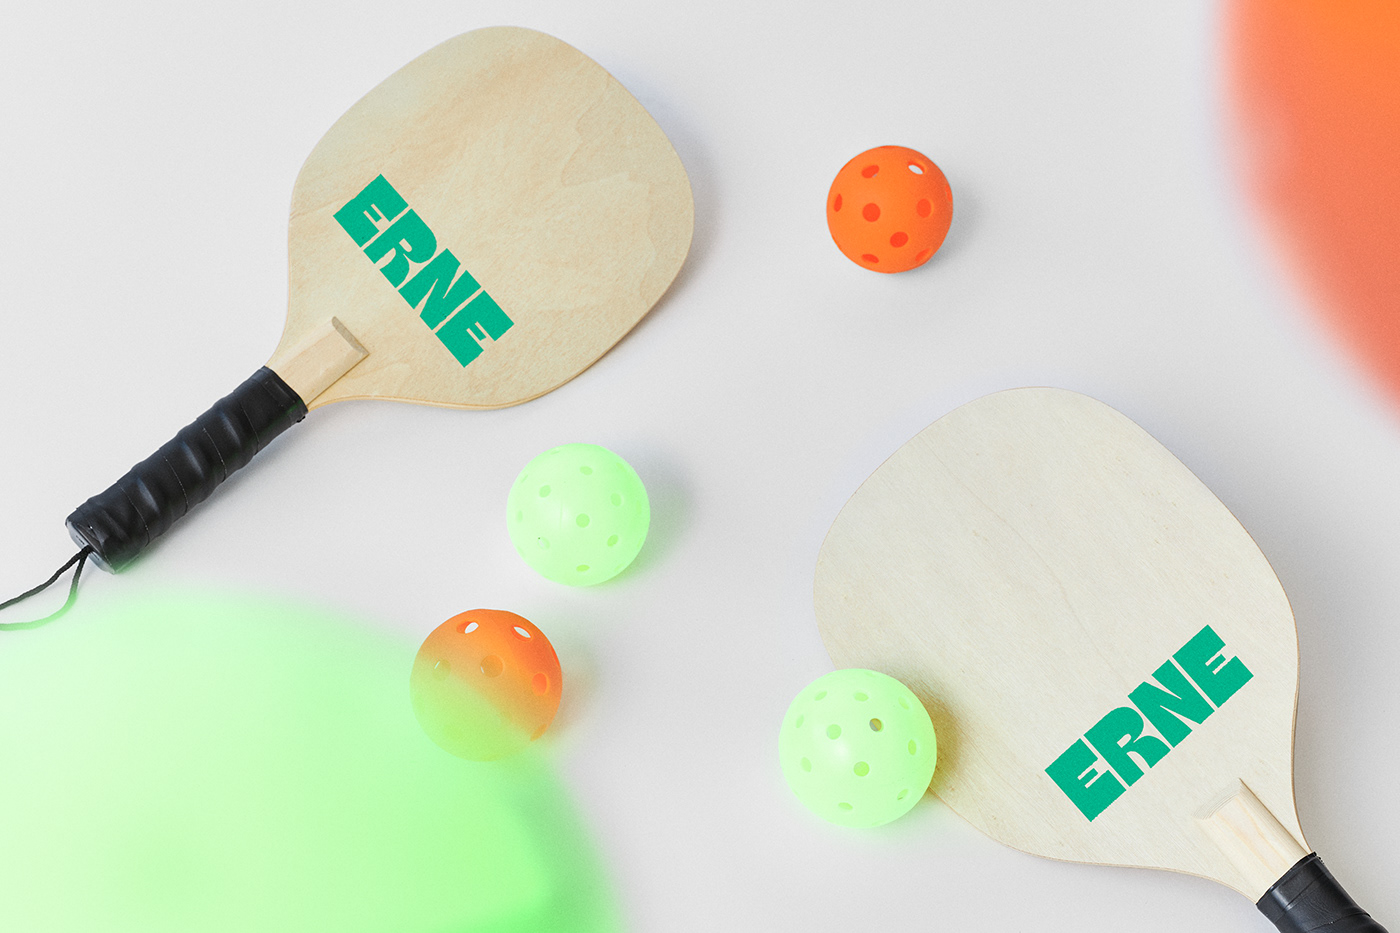 brand identity erne pickle Pickle ball pickle ball branding Pickleball pickleball branding Sports Branding Sports Design Tennis Branding